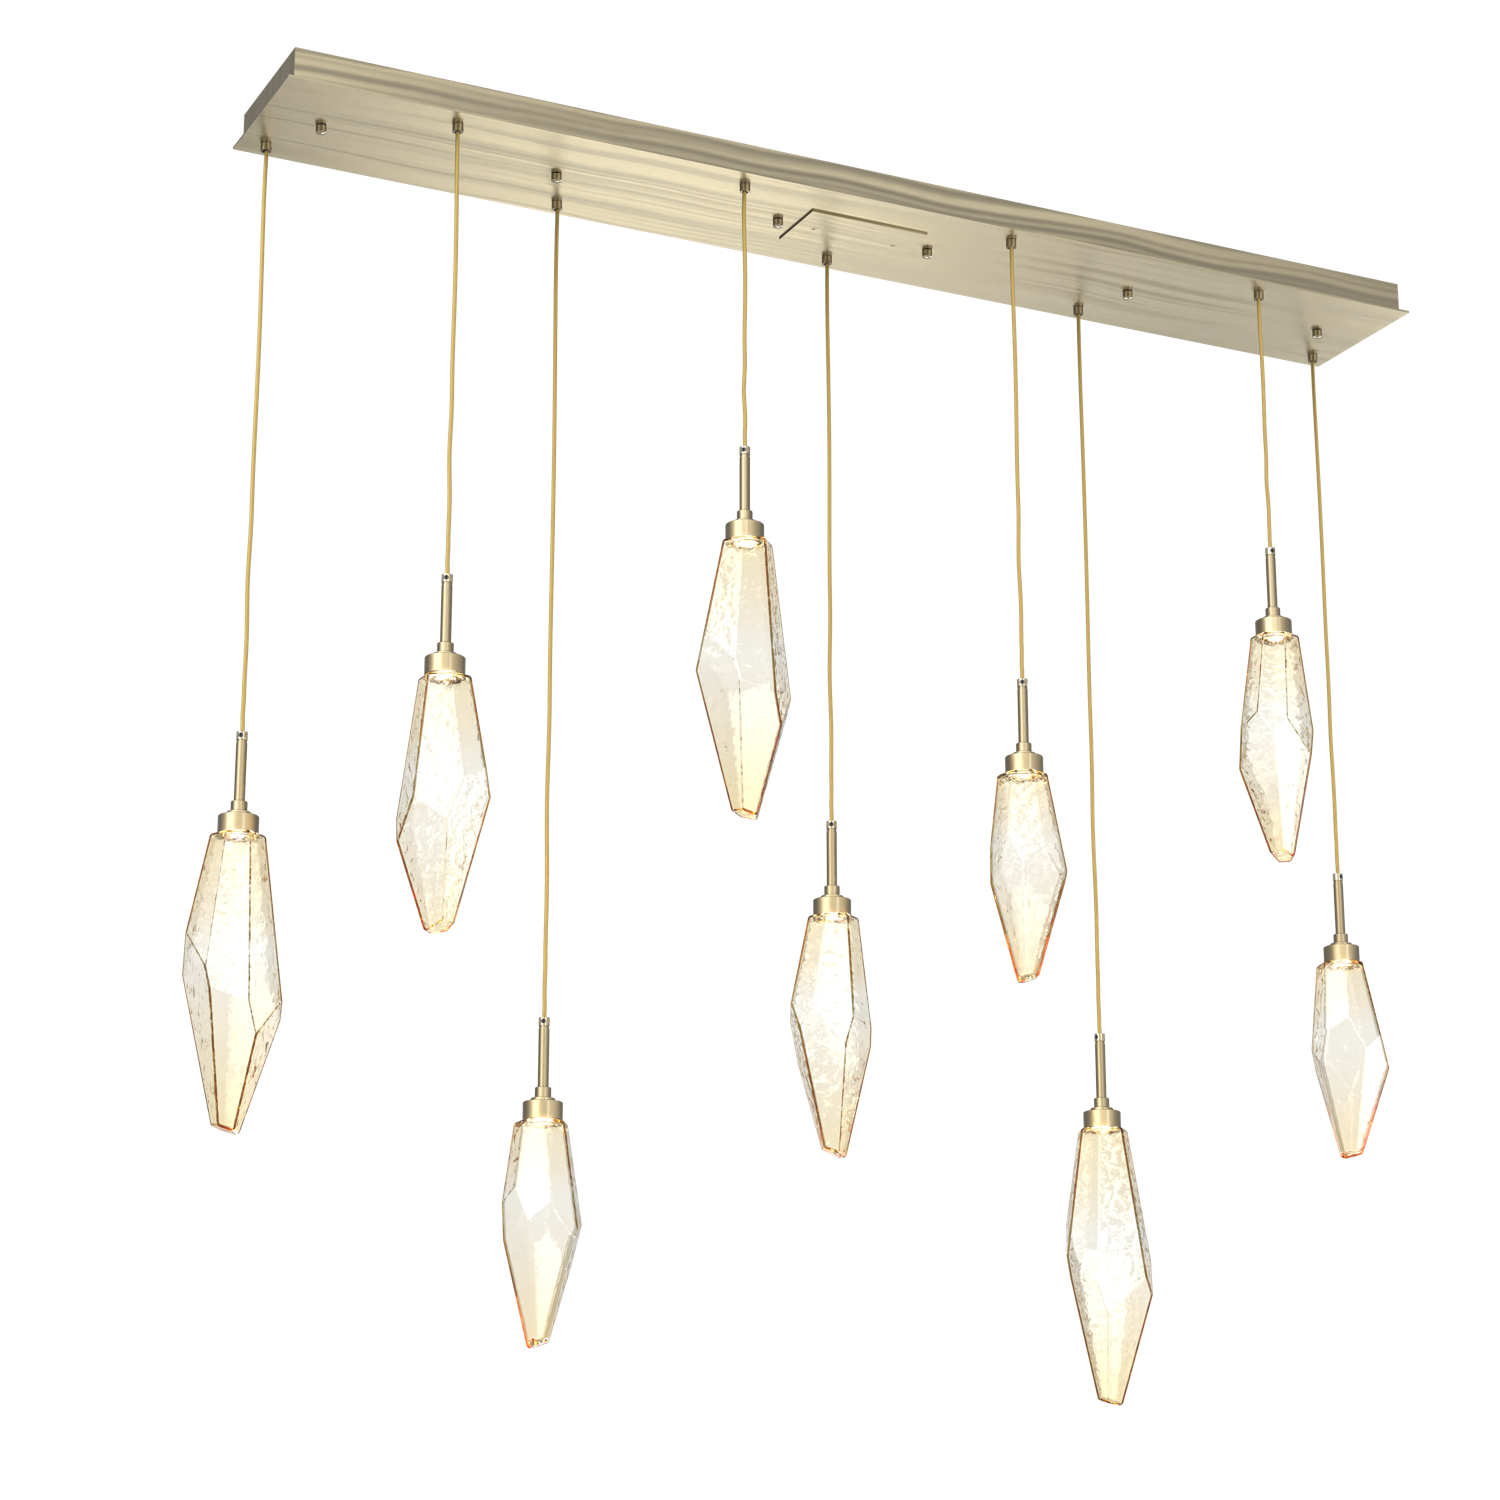 PLB0050-09-HB-CA-Hammerton-Studio-Rock-Crystal-9-light-linear-pendant-chandelier-with-heritage-brass-finish-and-chilled-amber-blown-glass-shades-and-LED-lamping